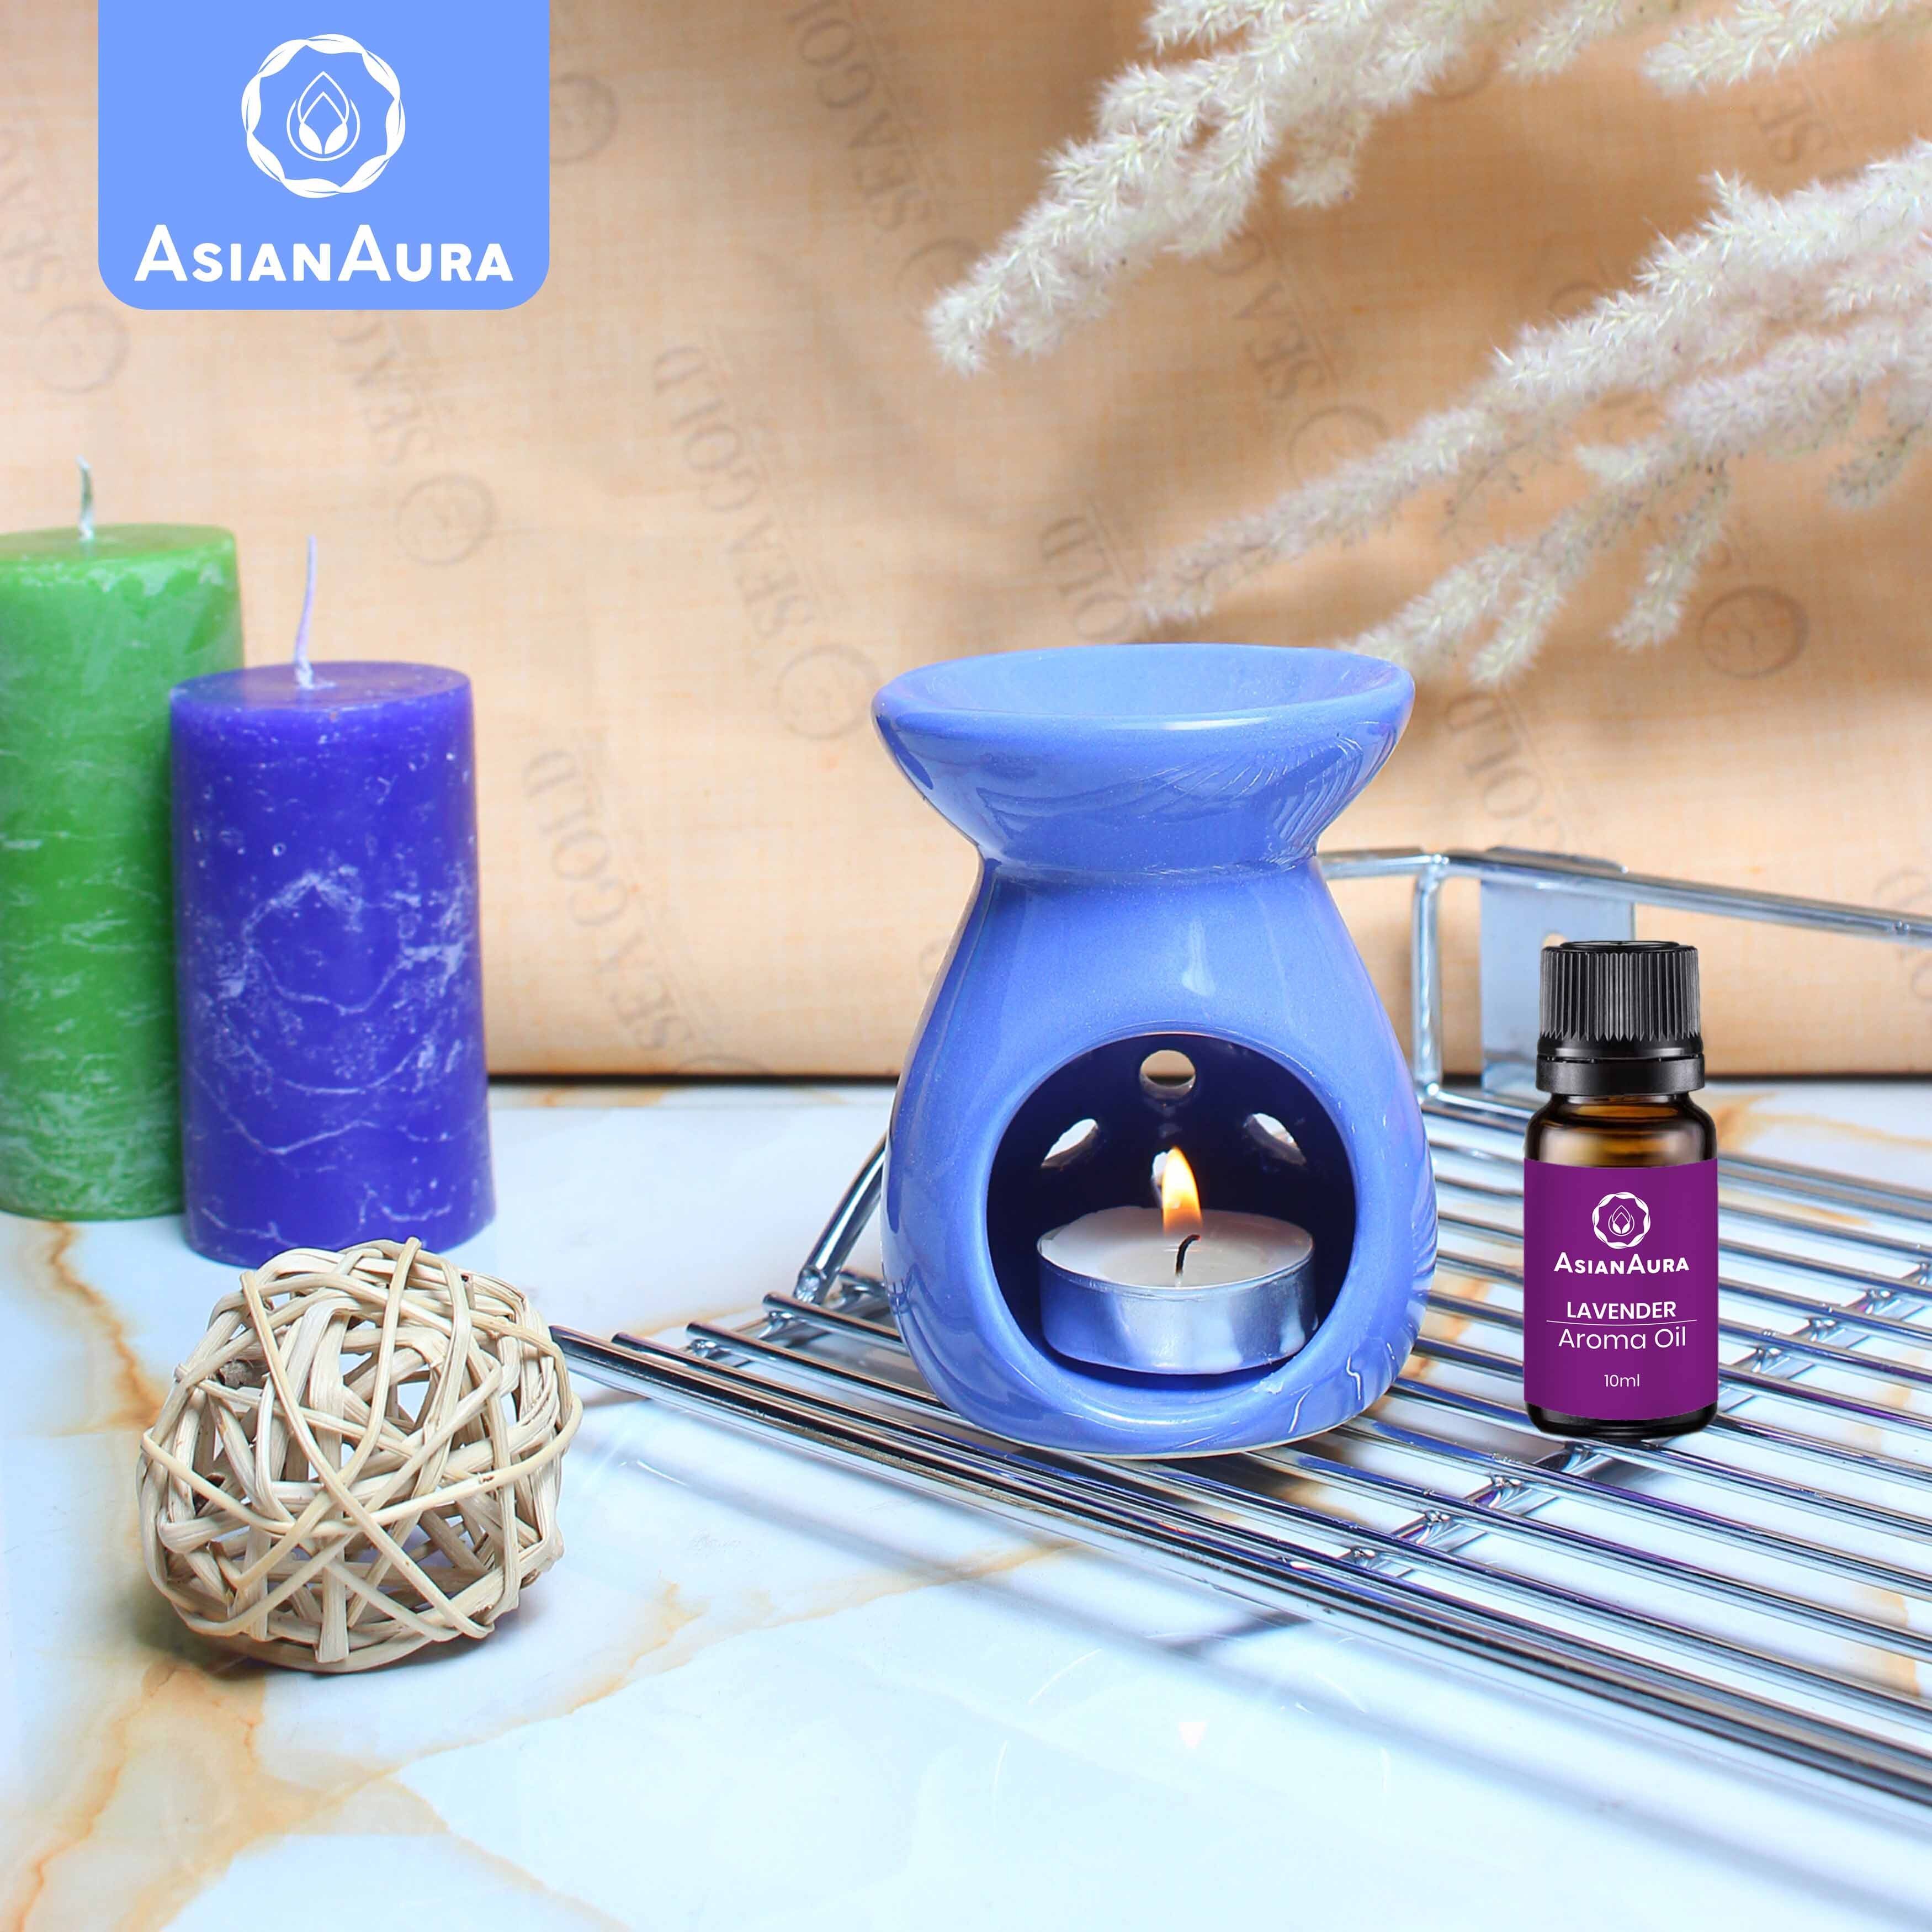 Asian Aura Ceramic Aromatic Oil Diffuser with 2 oil bottles AA-CB-0045B